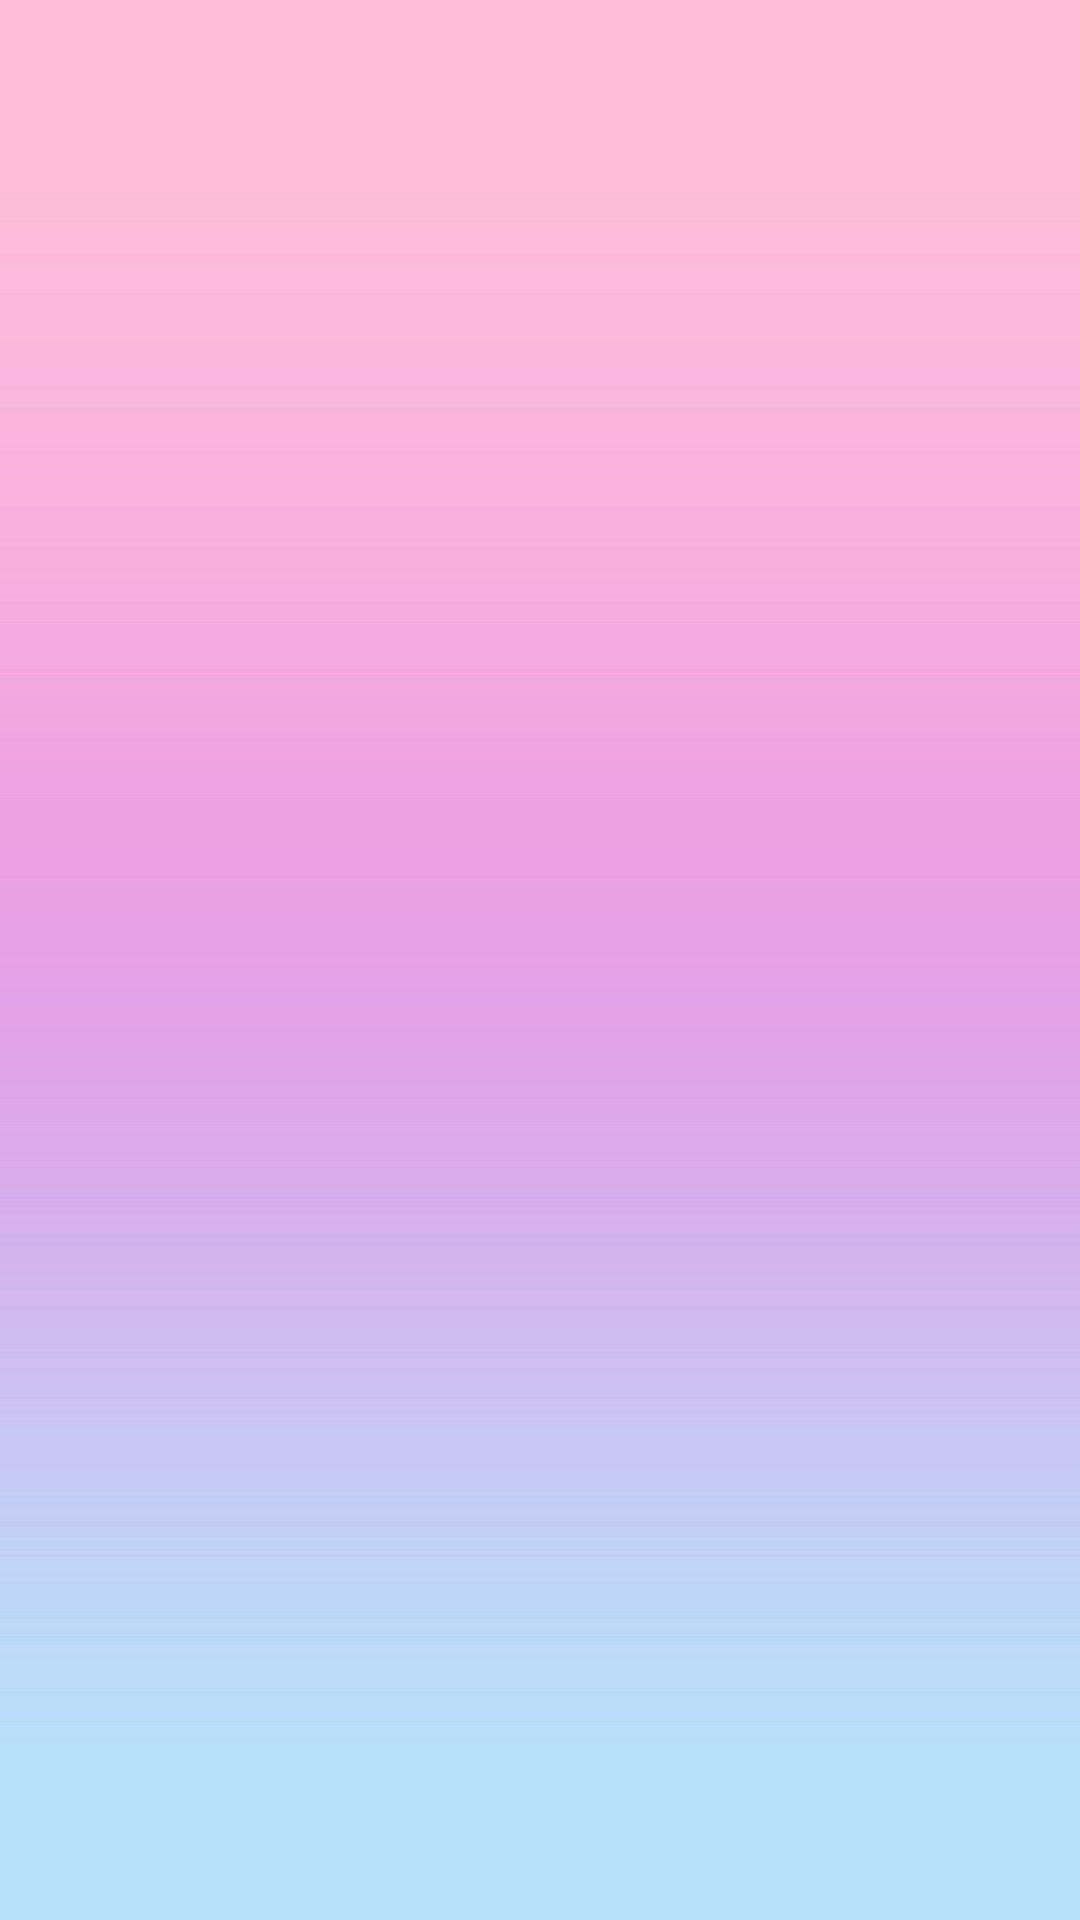 Gradient Wallpaper For Android Android Wallpaper